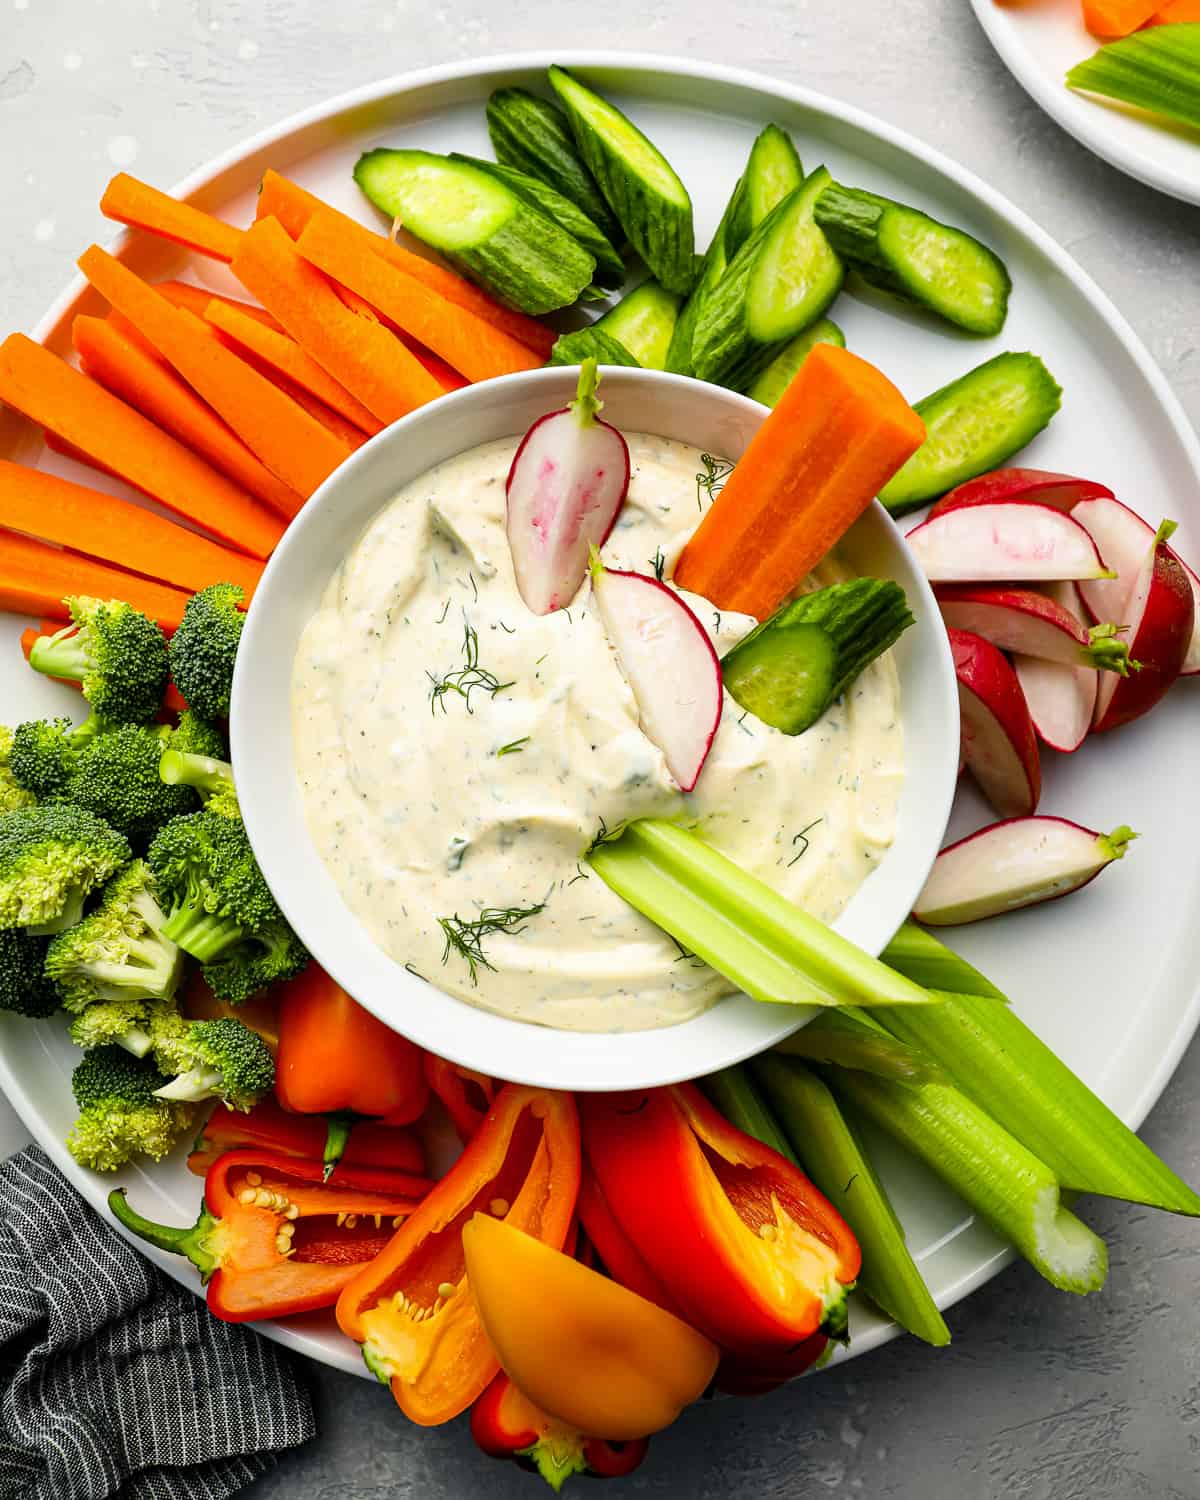 a vegetable tray filled with carrots, broccoli, peppers, celery, and radishes; with a bowl of veggie dip at the center, with vegetables partially dipped into it.